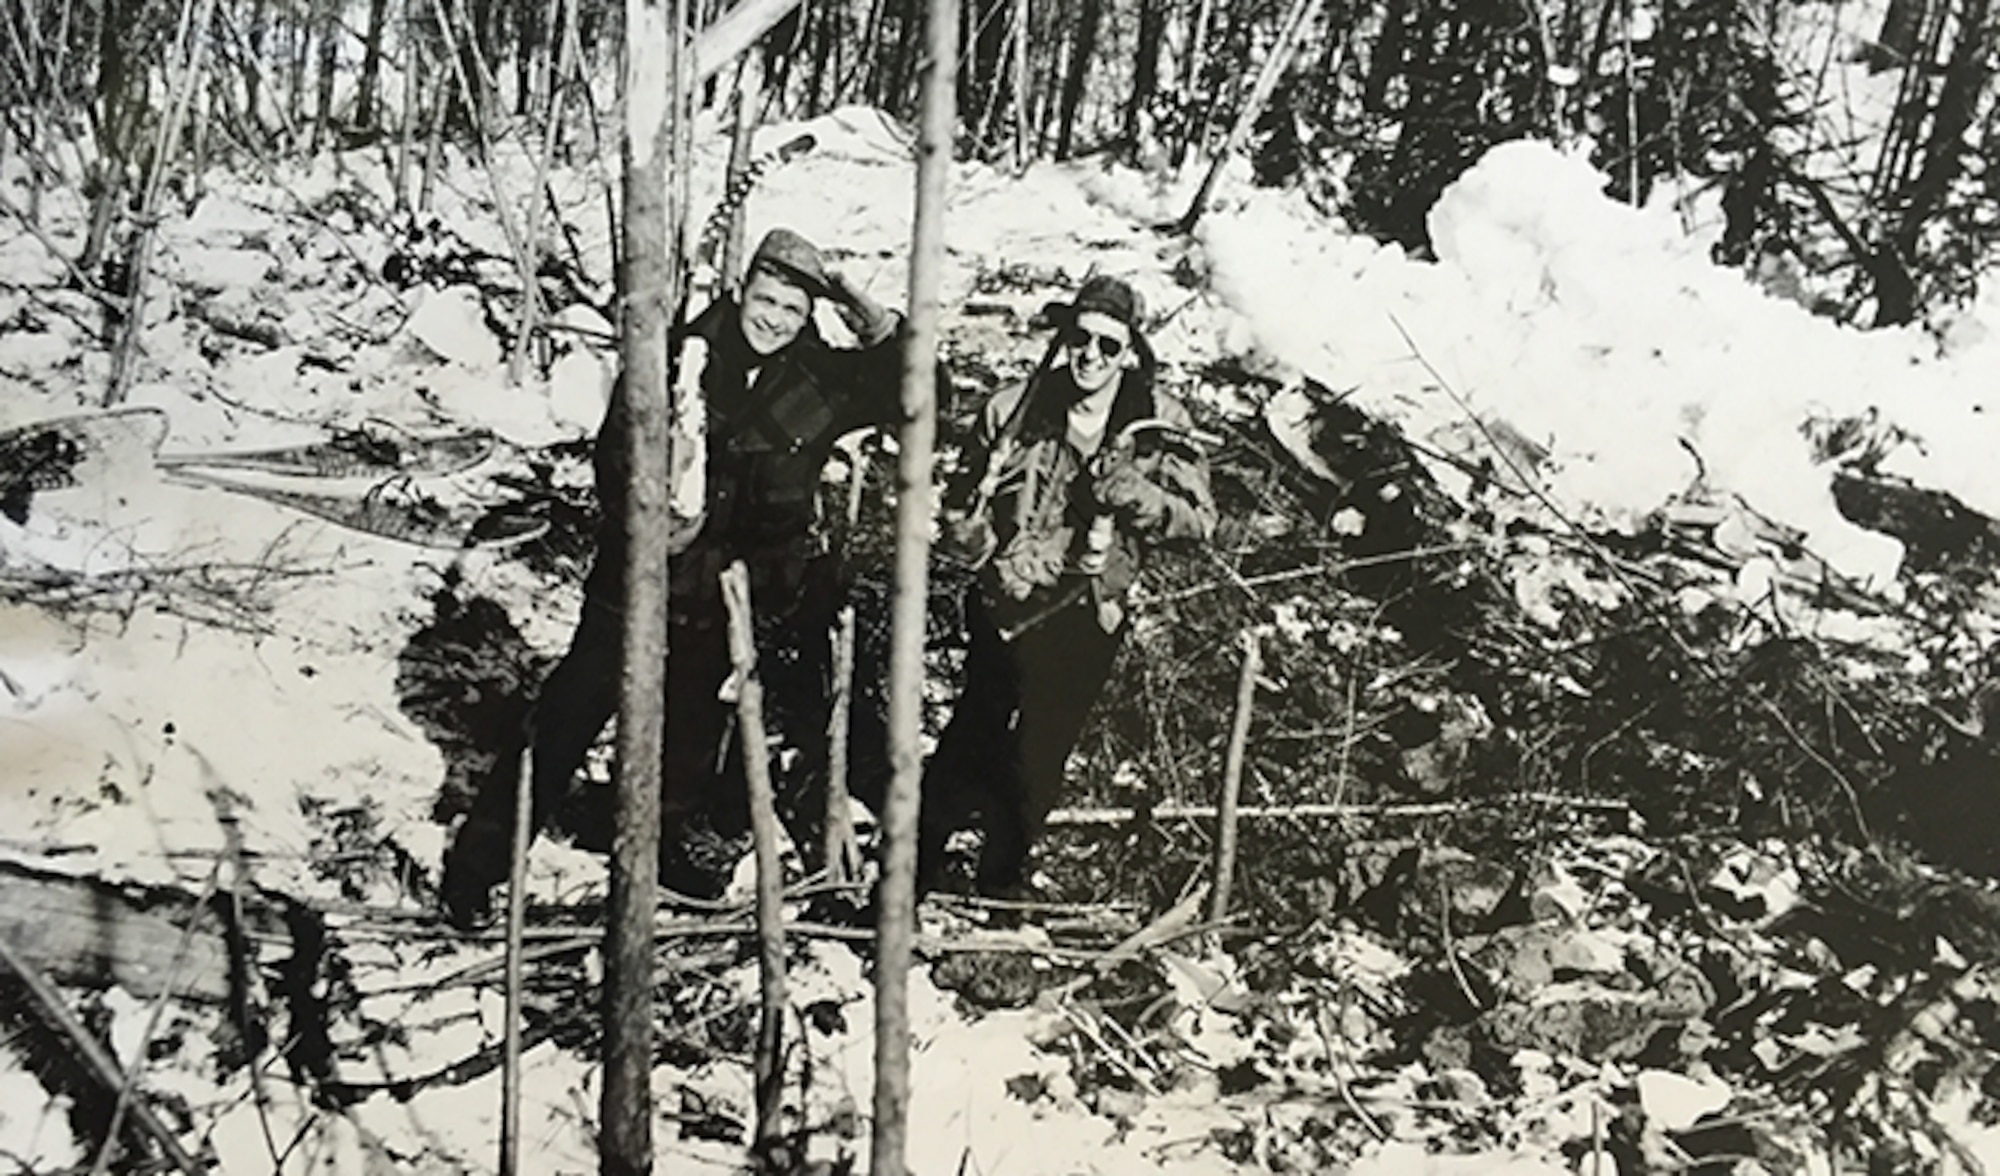 Lt. Hal Morrill poses with Lt. Dallas Sartz within the impact crater of the F-86 Sabre crash, days after the crash. Due to the terrain of the crash site, the Washington National Guard was never able to remove the wreckage. (Courtesy Photo)